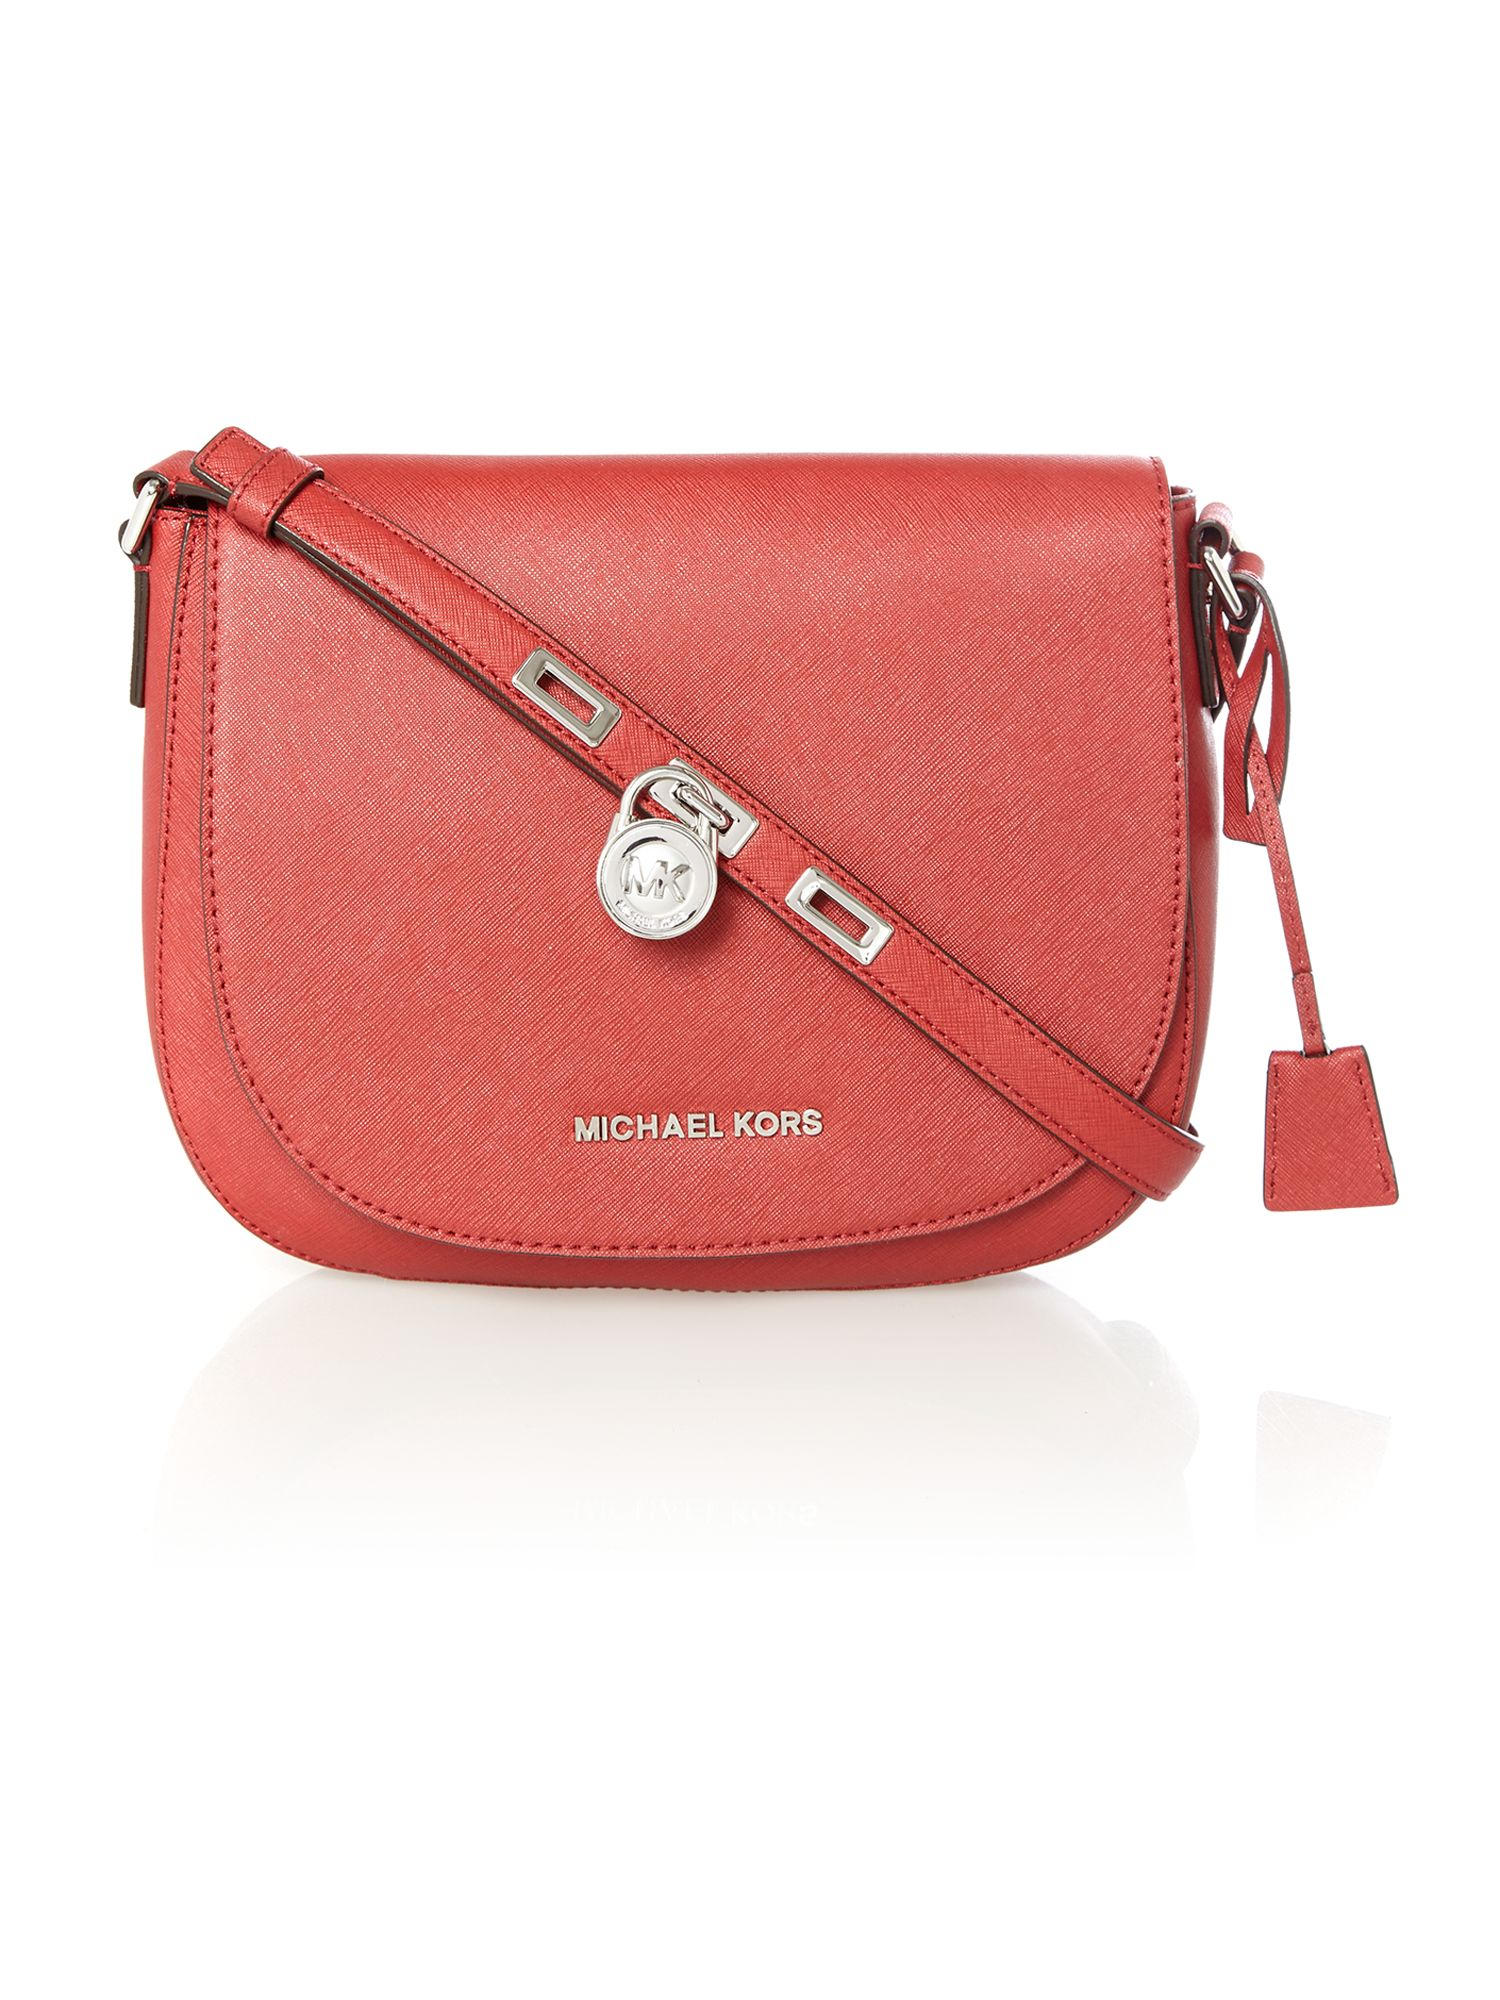 Michael Kors Hamiltin Red Flap Over Cross Body Bag in Red